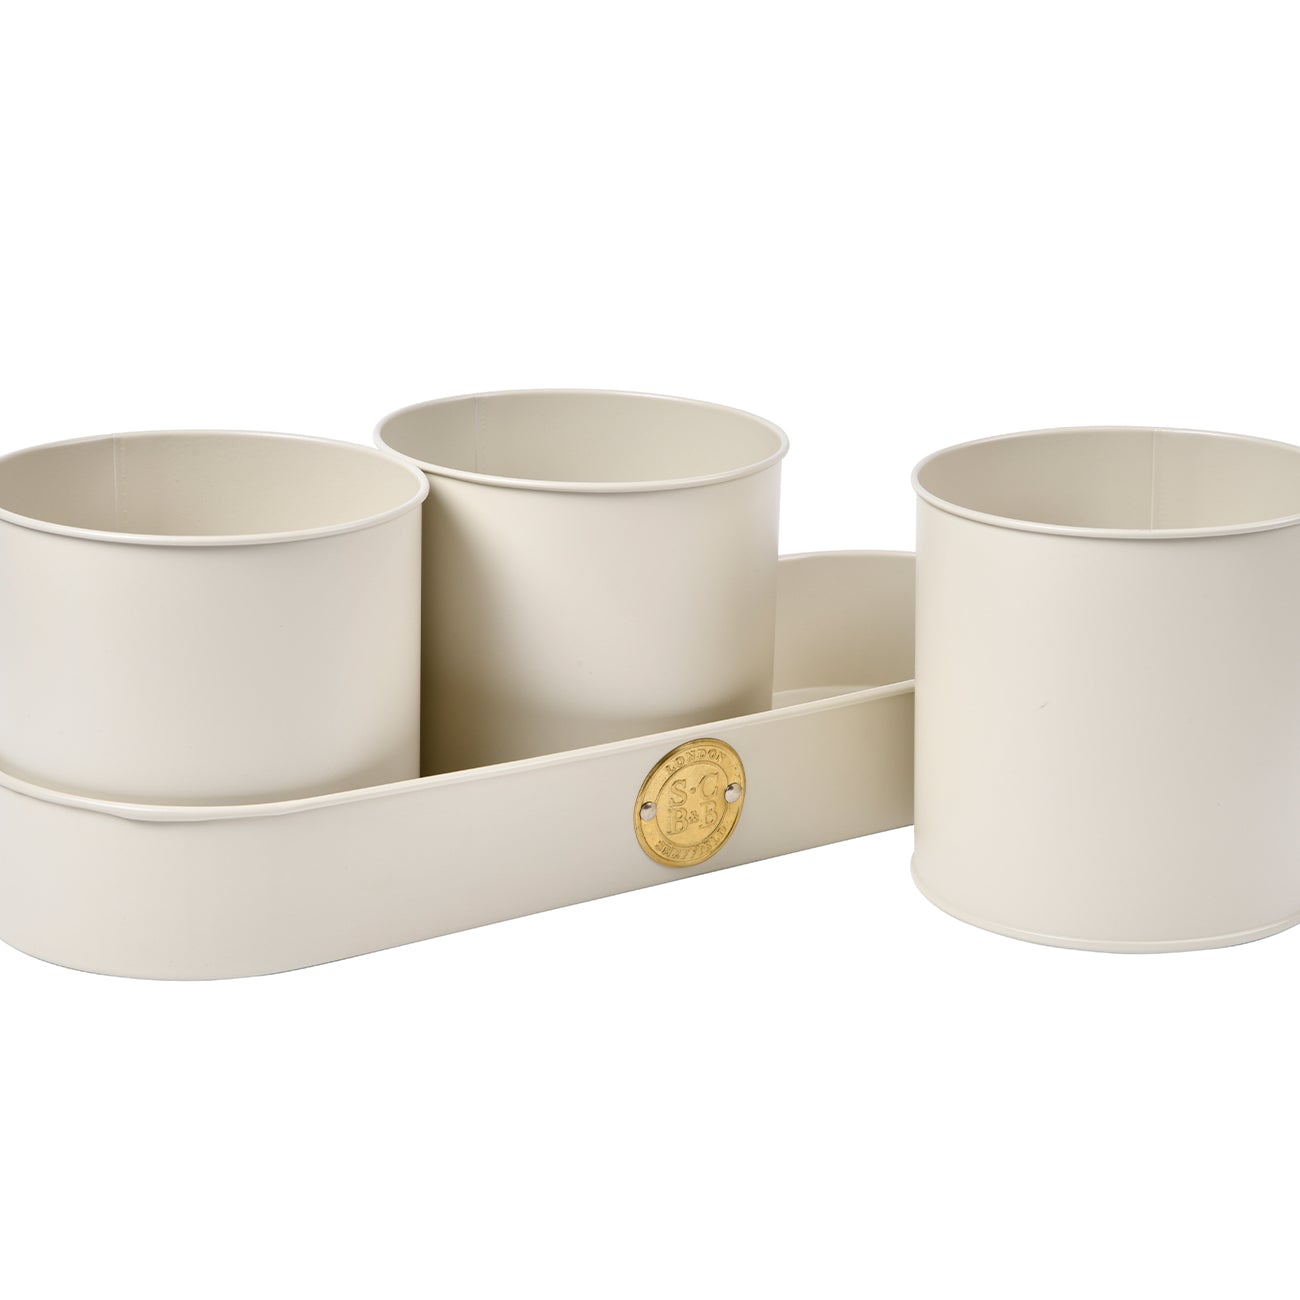 In a classic buttermilk shade with a subtle matt finish, these pots have a distinctive high quality finish, and a stylish brass seal bearing the Sophie Conran for Burgon & Ball logo adds the finishing touch.